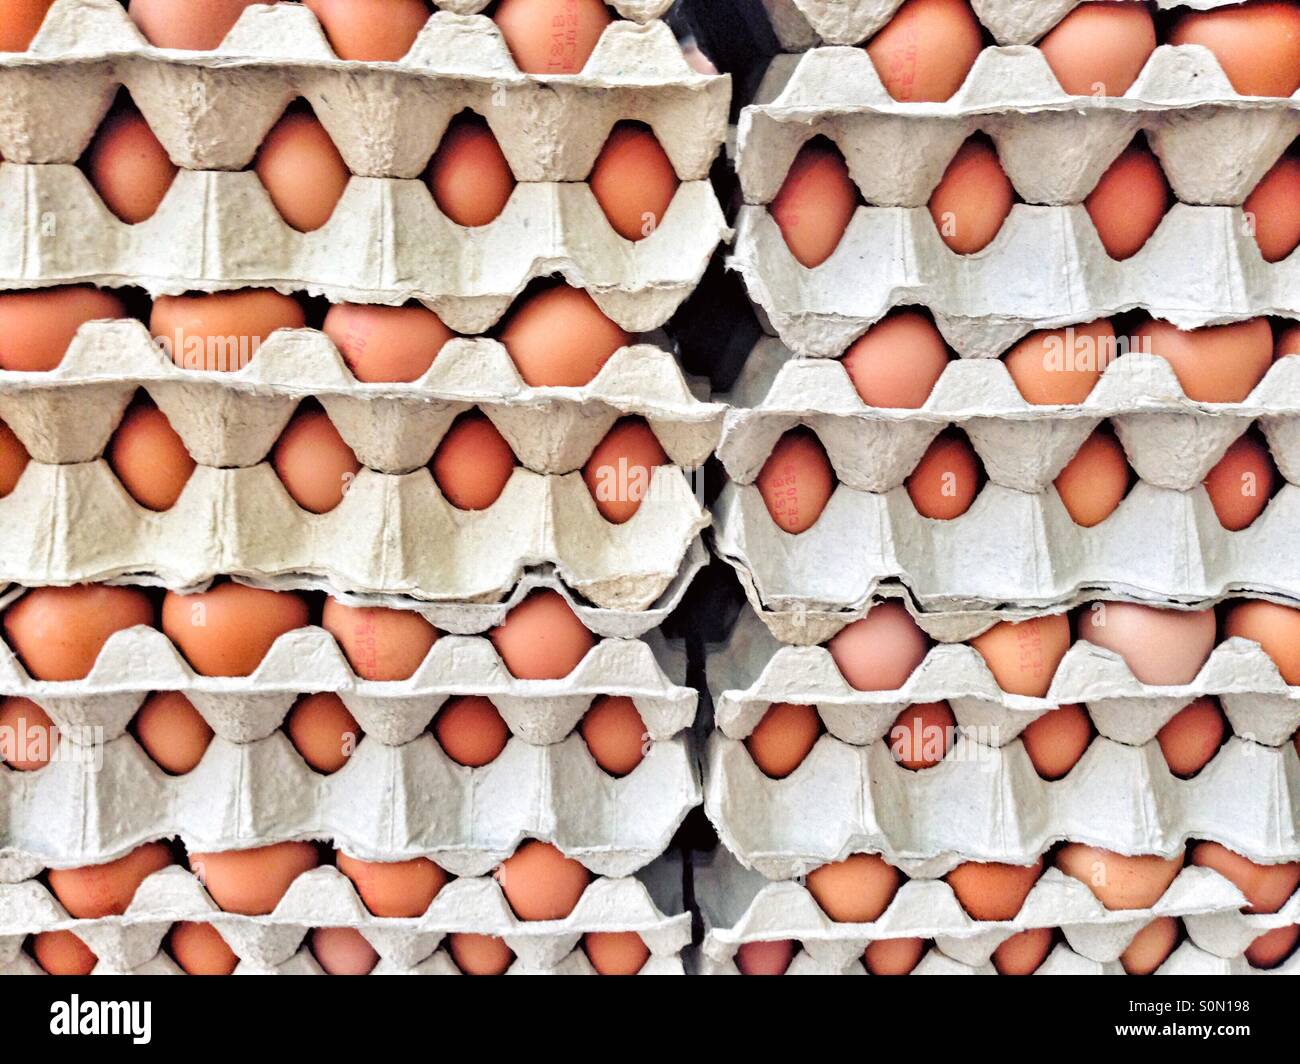 eggs stacked in cartons Stock Photo